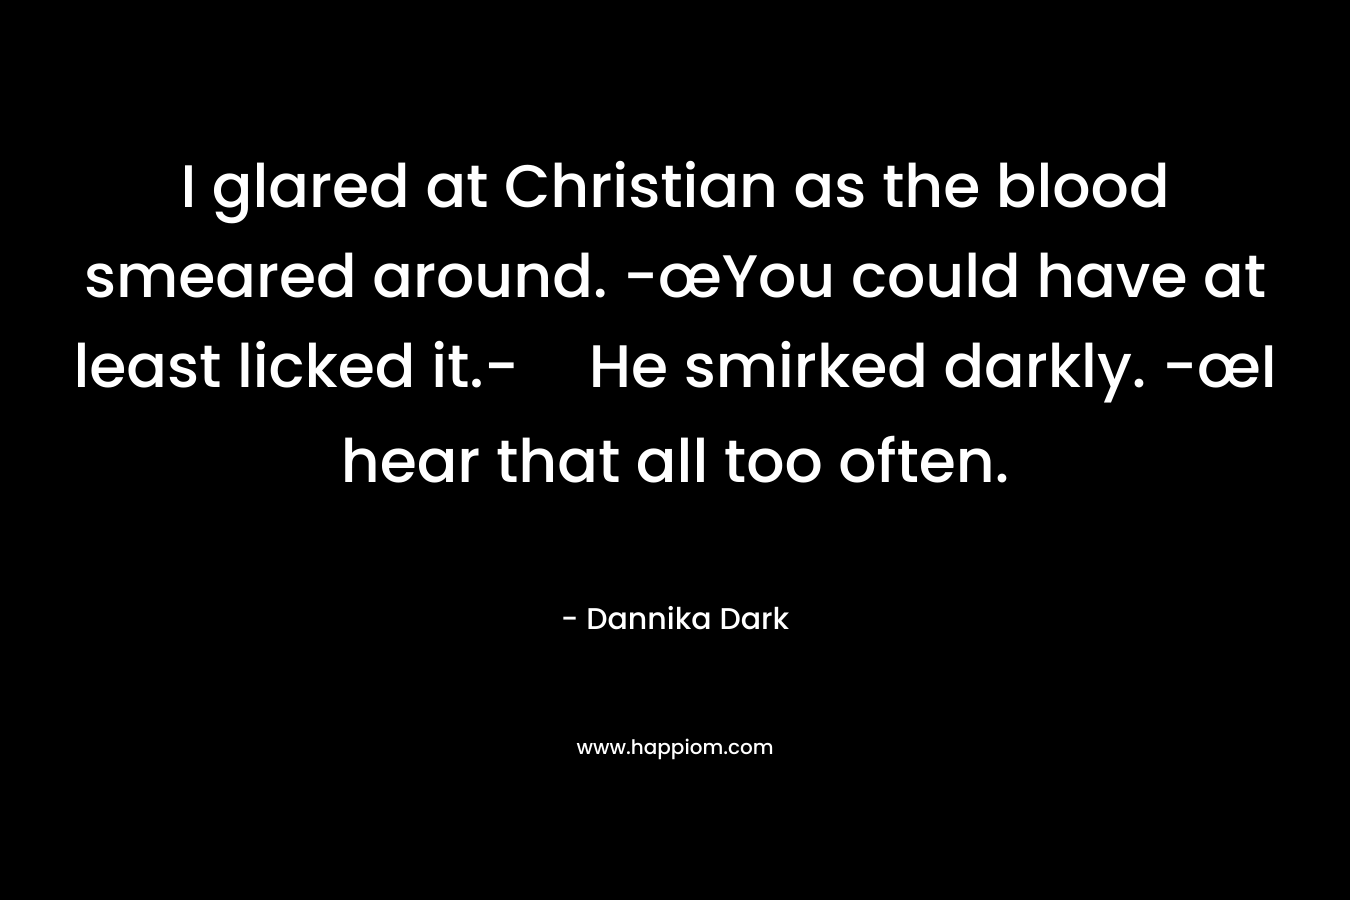 I glared at Christian as the blood smeared around. -œYou could have at least licked it.-He smirked darkly. -œI hear that all too often.